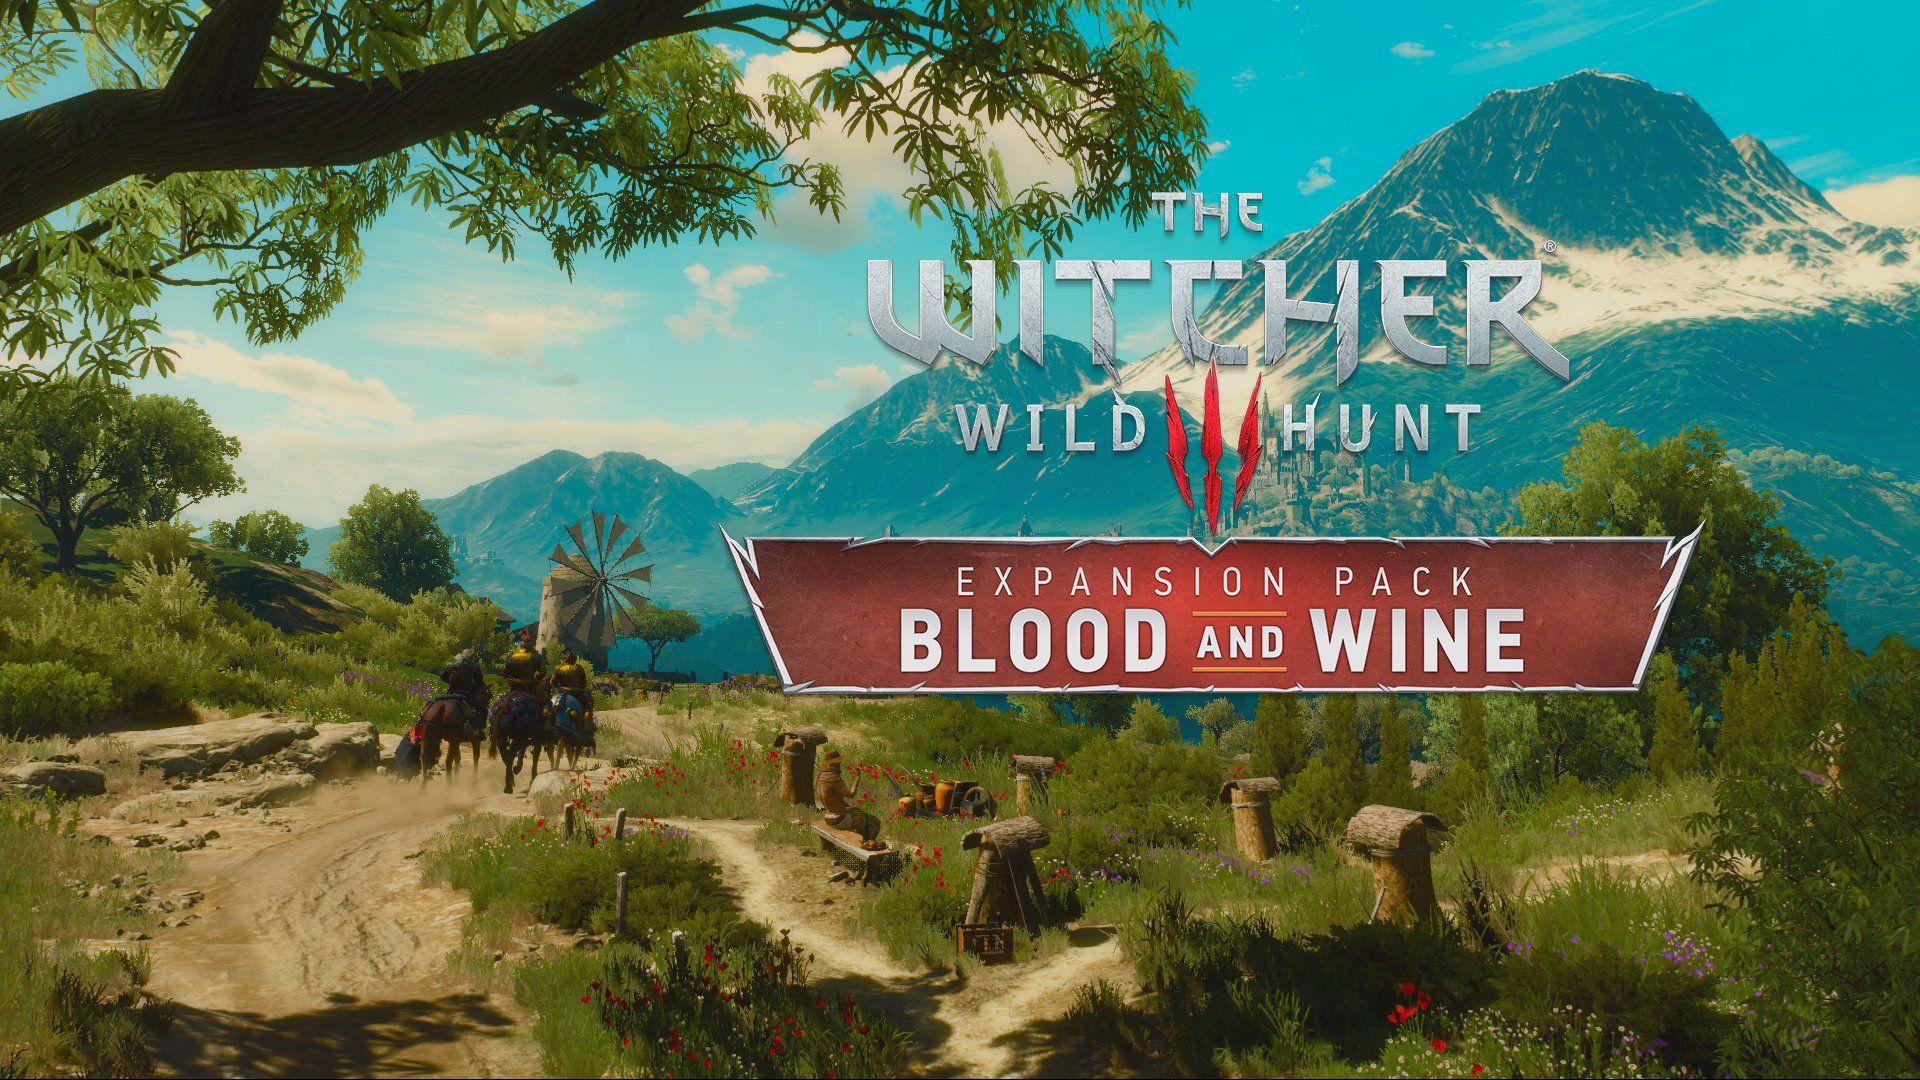 The Witcher 3 Blood And Wine Wallpapers